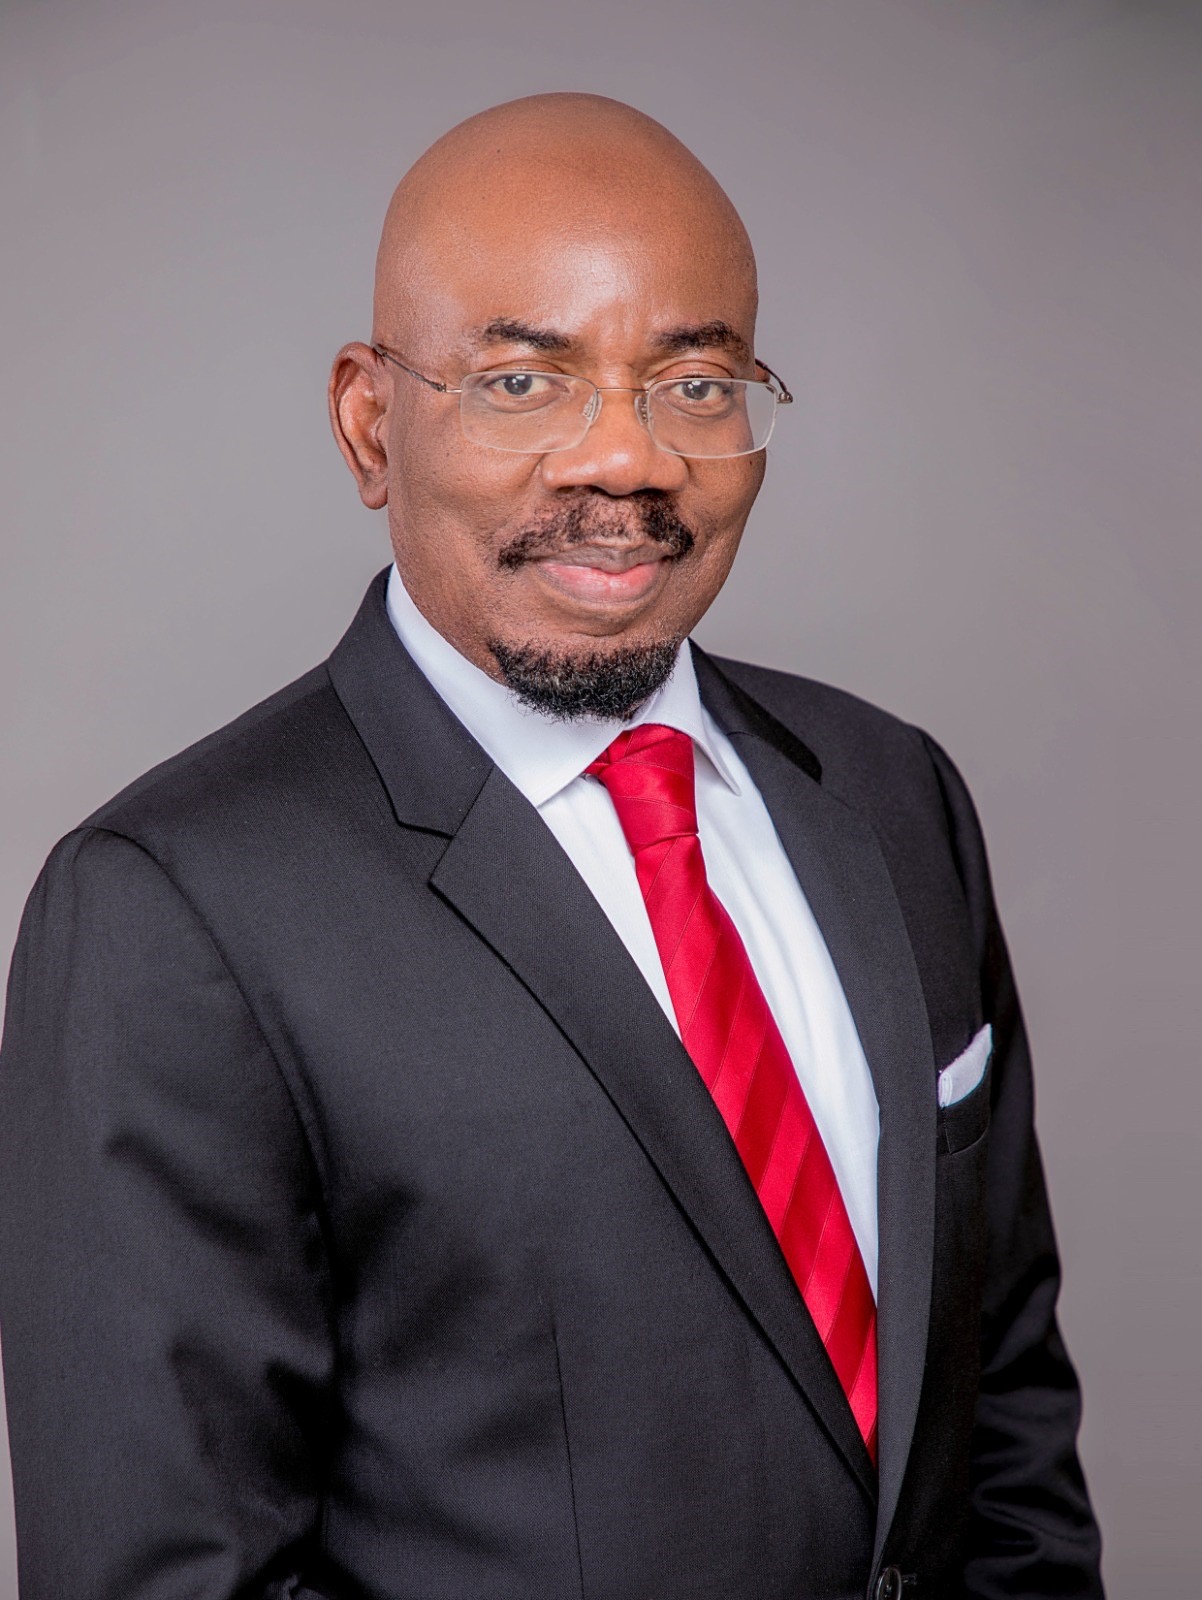 BREAKING: TINUBU APPOINTS NIGERIA’S RENOWNED BANKER, JIM OVIA AS CHAIRMAN OF NIGERIAN EDUCATION LOAN FUND